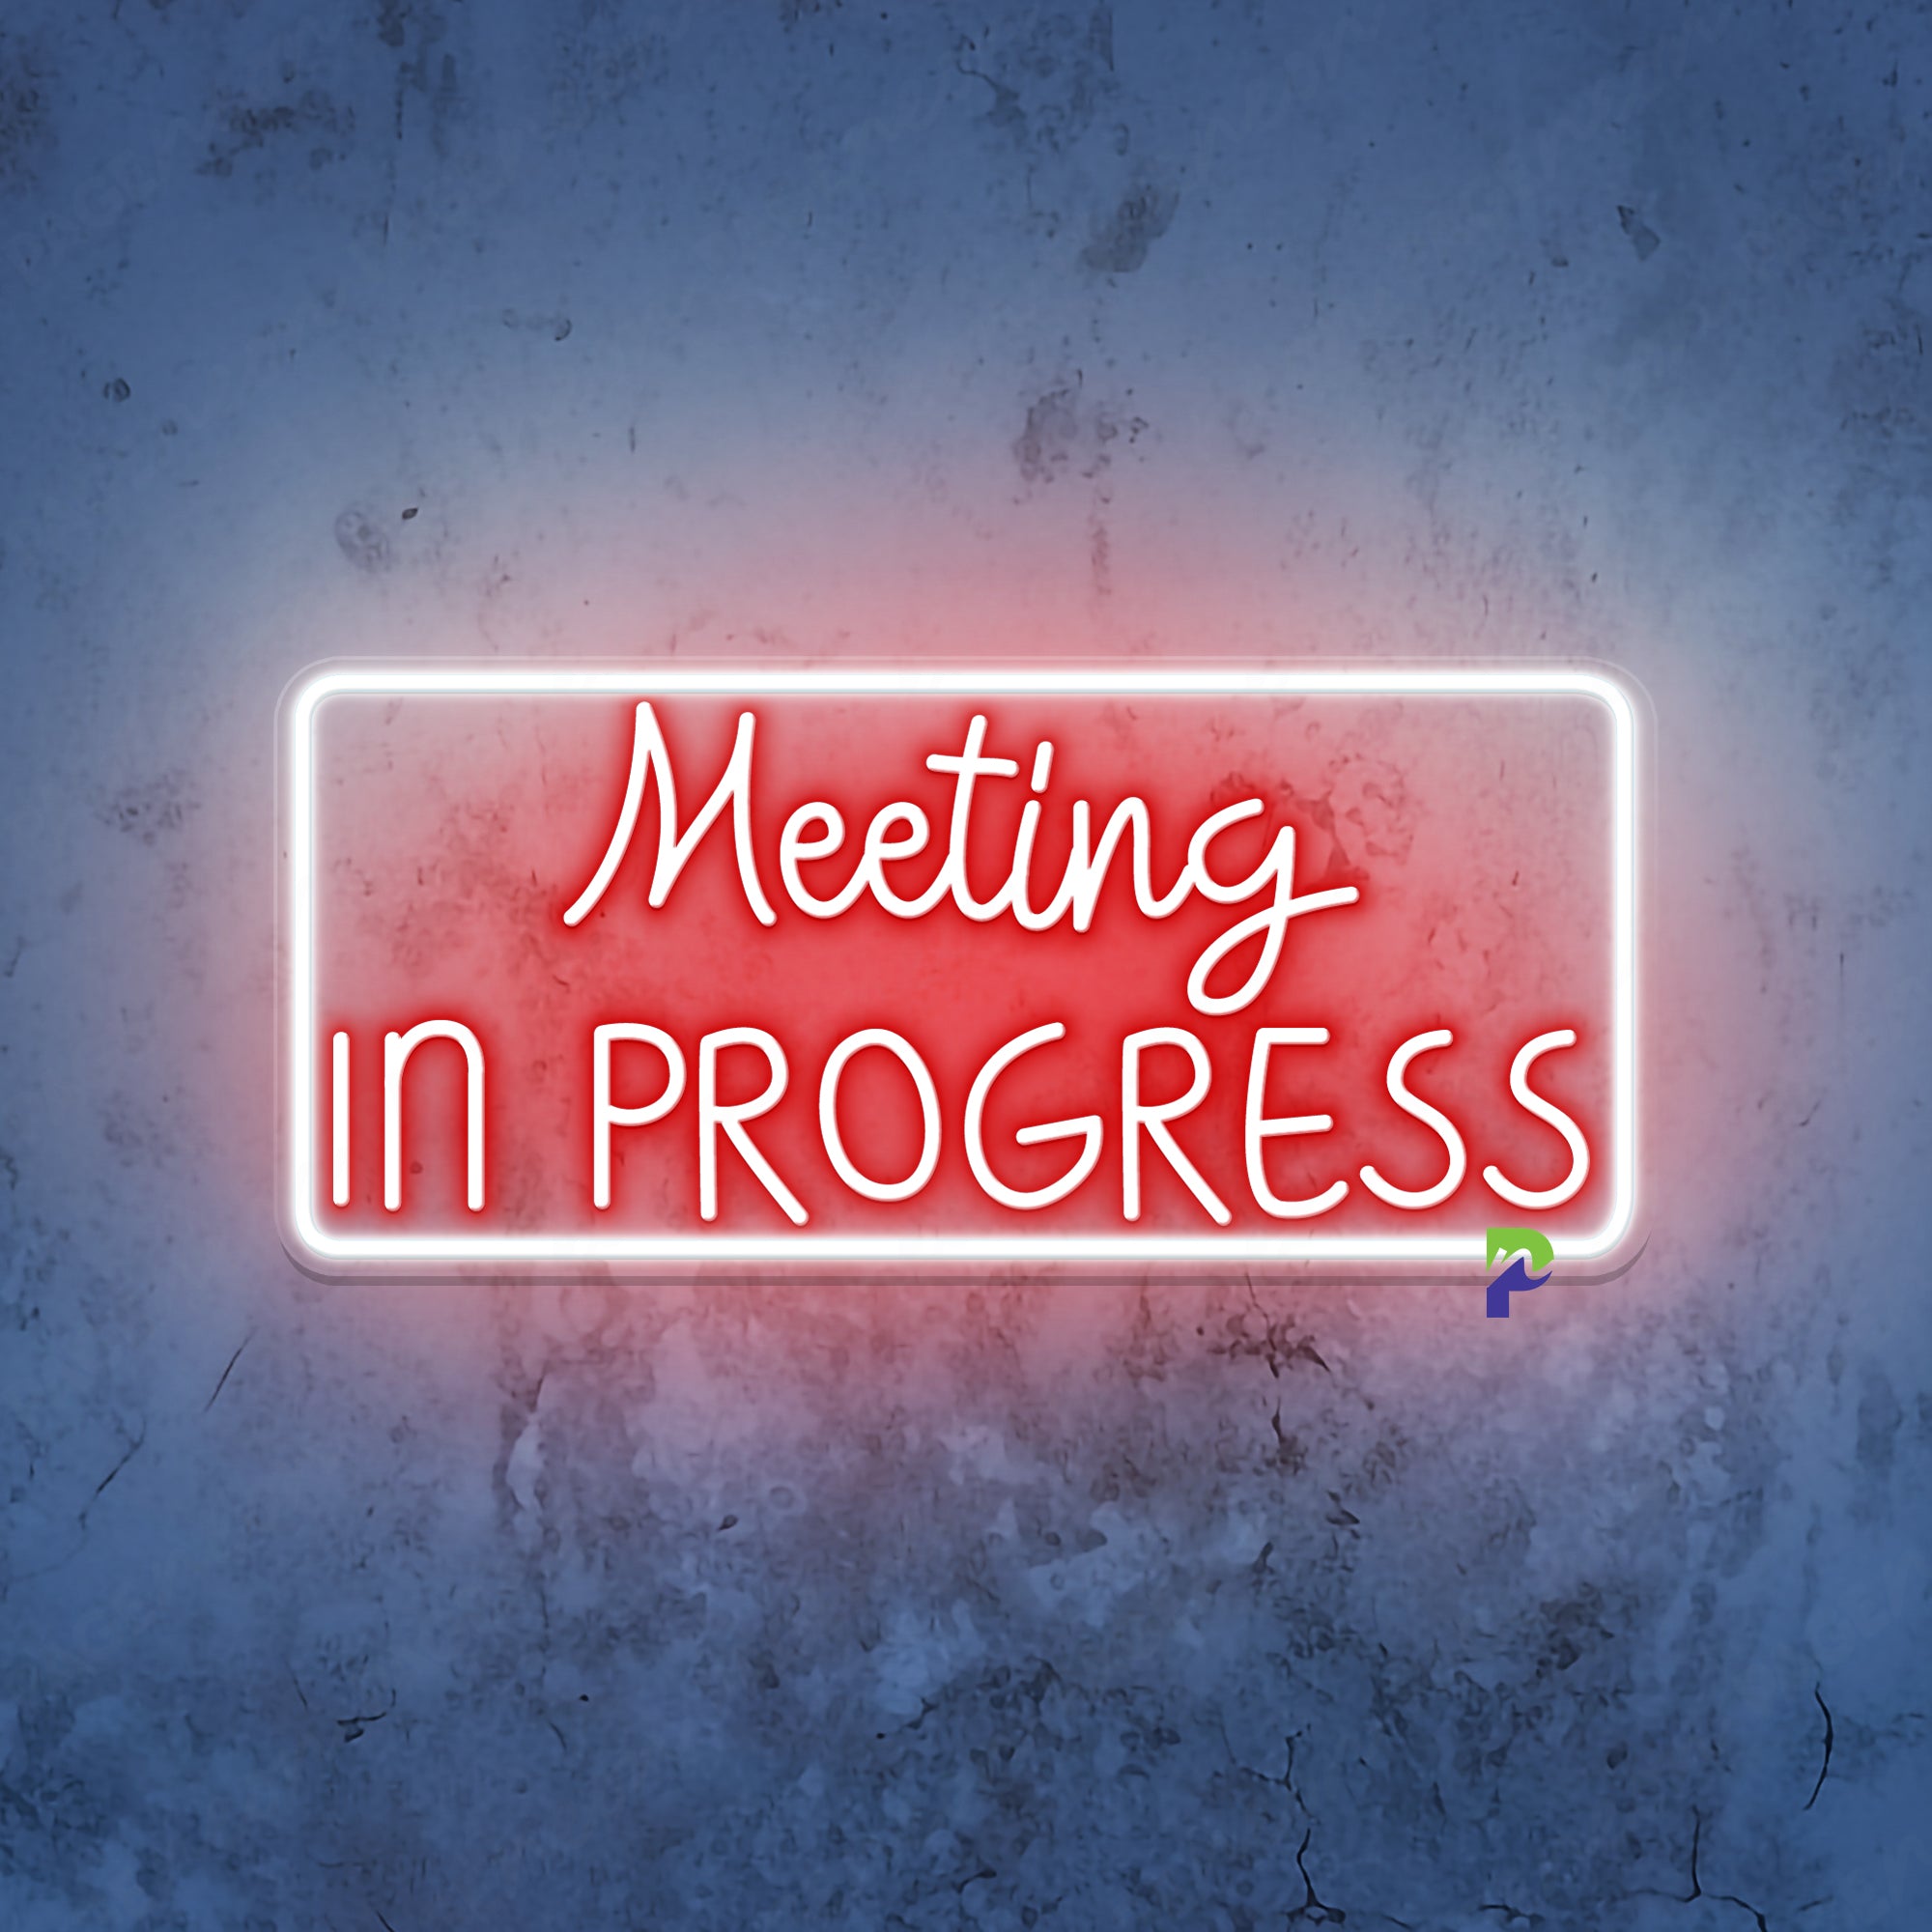 Meeting In Progress Neon Sign Friendly Notice Led Light